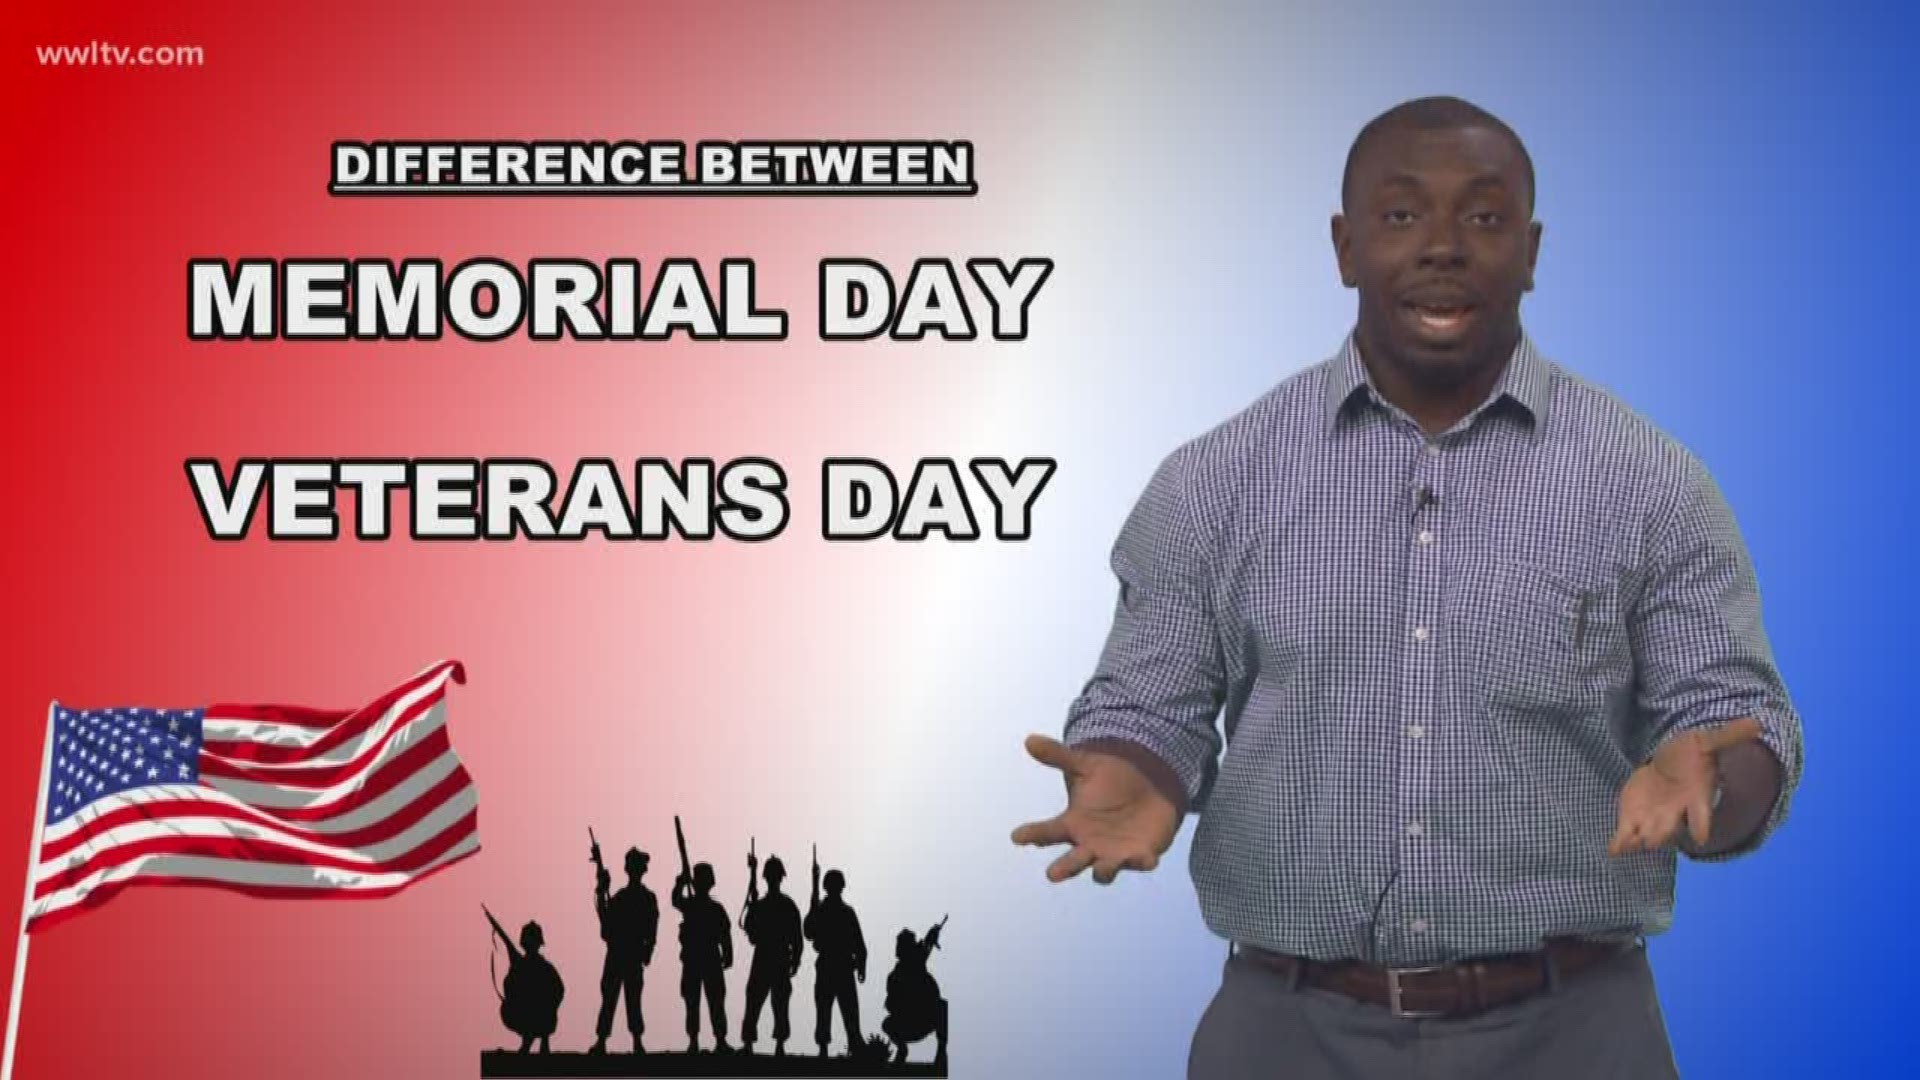 Memorial Day and Veterans Day both honor the military. Here's how they differ.